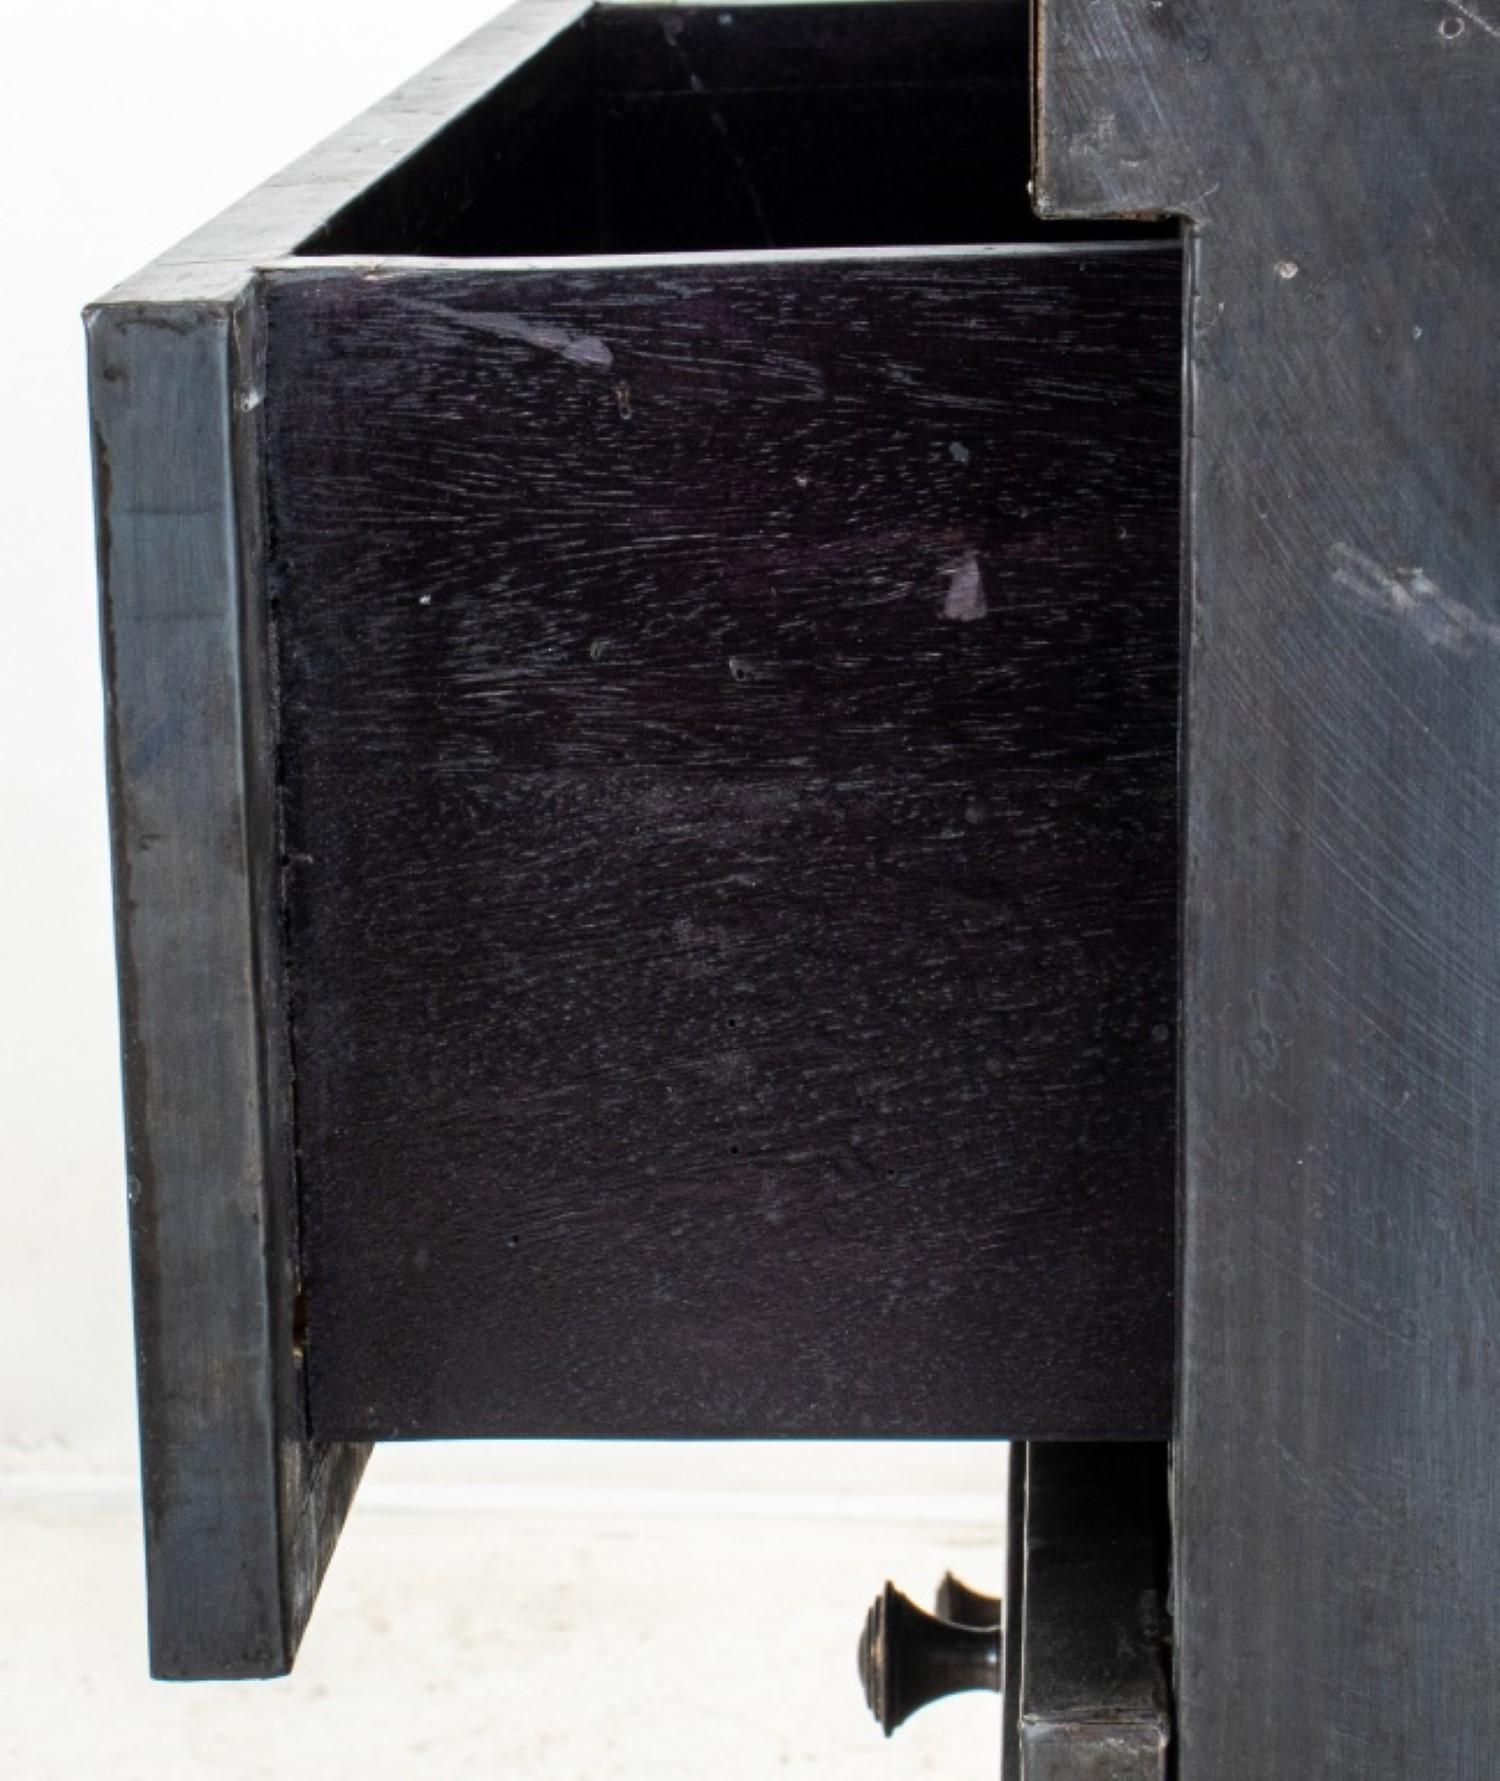 
The Industrial oiled metal sheeting chest of drawers has approximate
 
Dimensions of 42.5 inches in height, 50.5 inches in width, and 20 inches in depth.